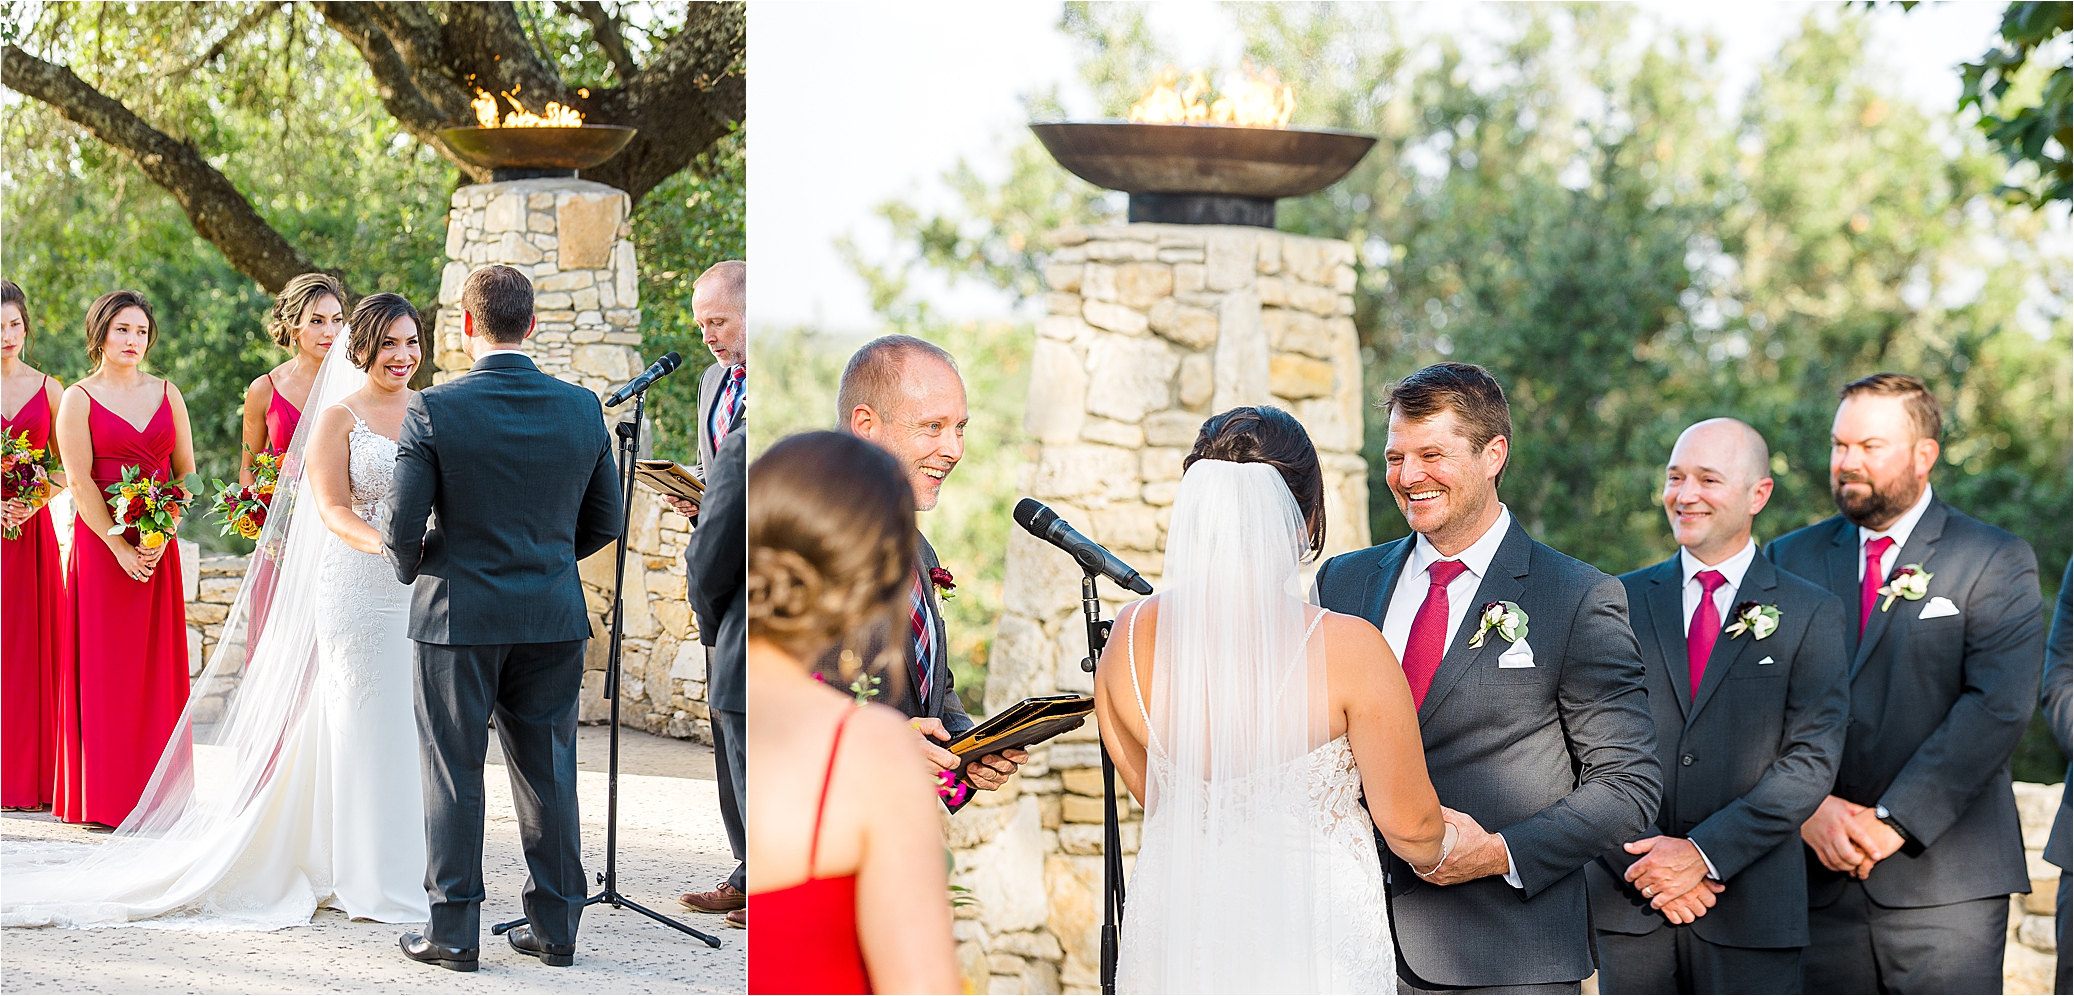 A bride and groom exchange vows at Paniolo Ranch in Boerne, Texas